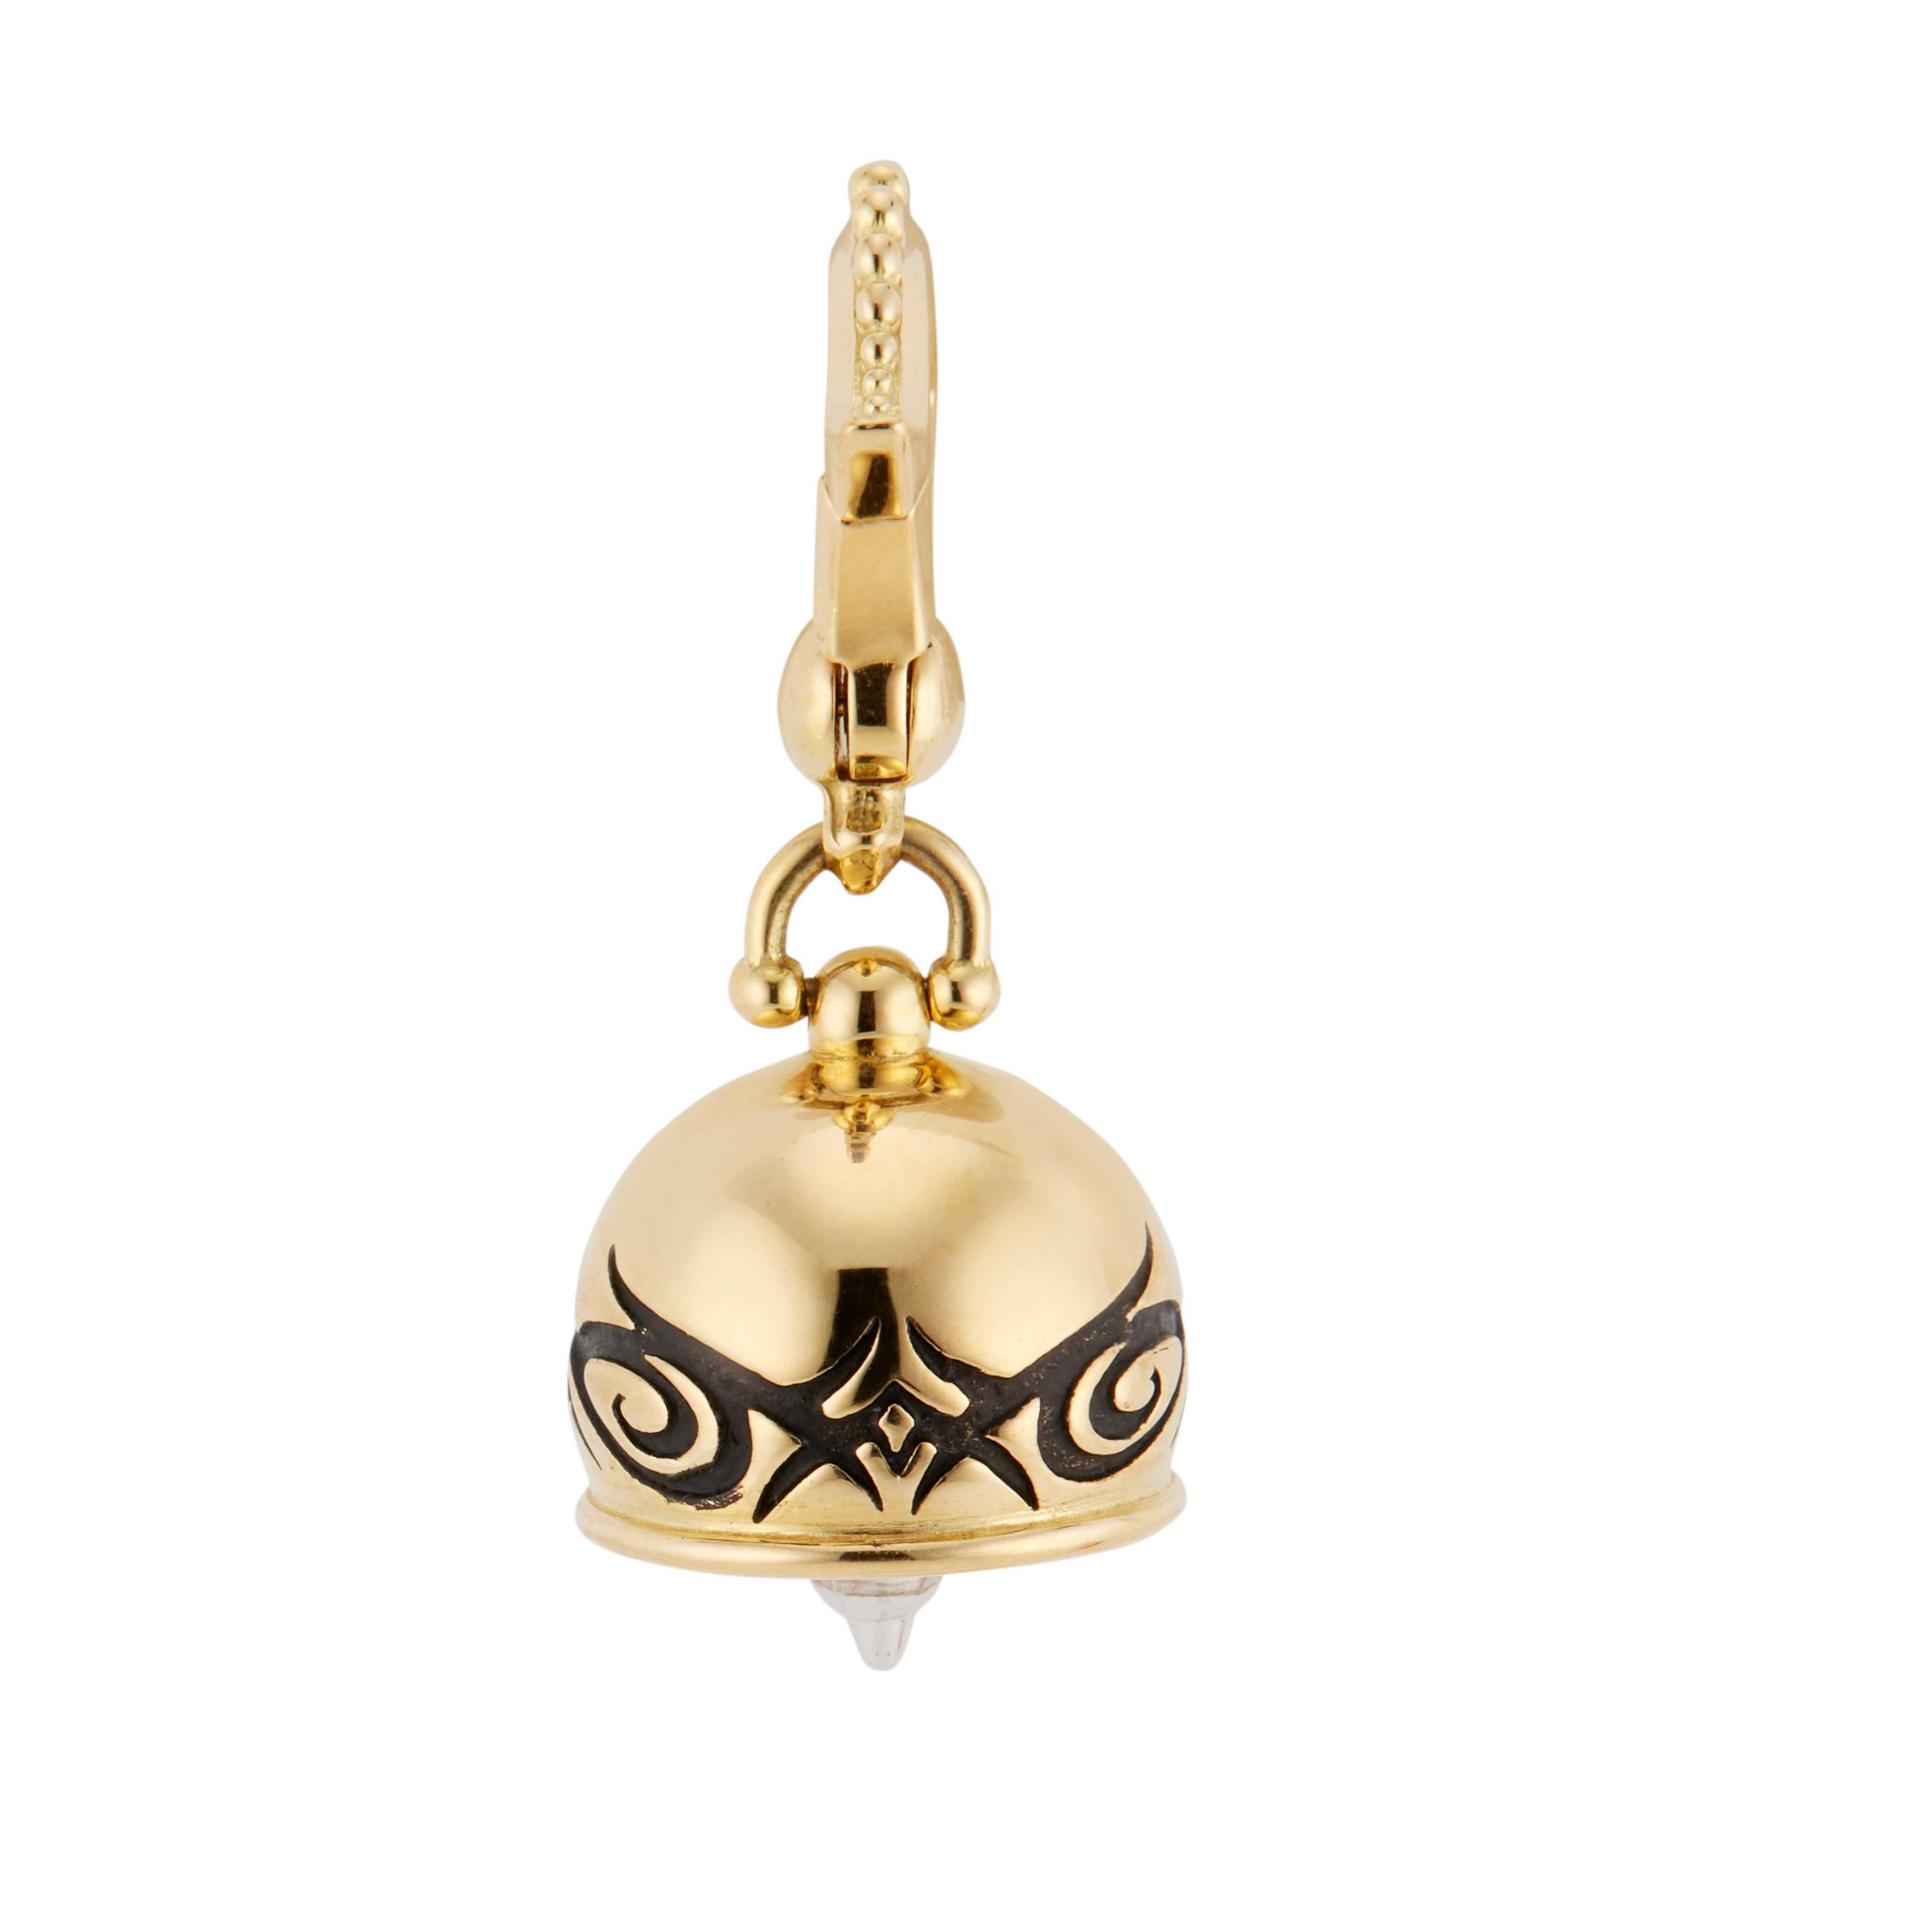 Small size meditation bell in 18k yellow gold with black rhodium pattern by Paul Morelli.

18k yellow gold 
Stamped: 750
Hallmark: Morelli 
5.1 grams
Top to bottom: 25.8mm or 1 Inch
Width: 11.7mm or .5 Inch
Depth or thickness: 11.5mm
